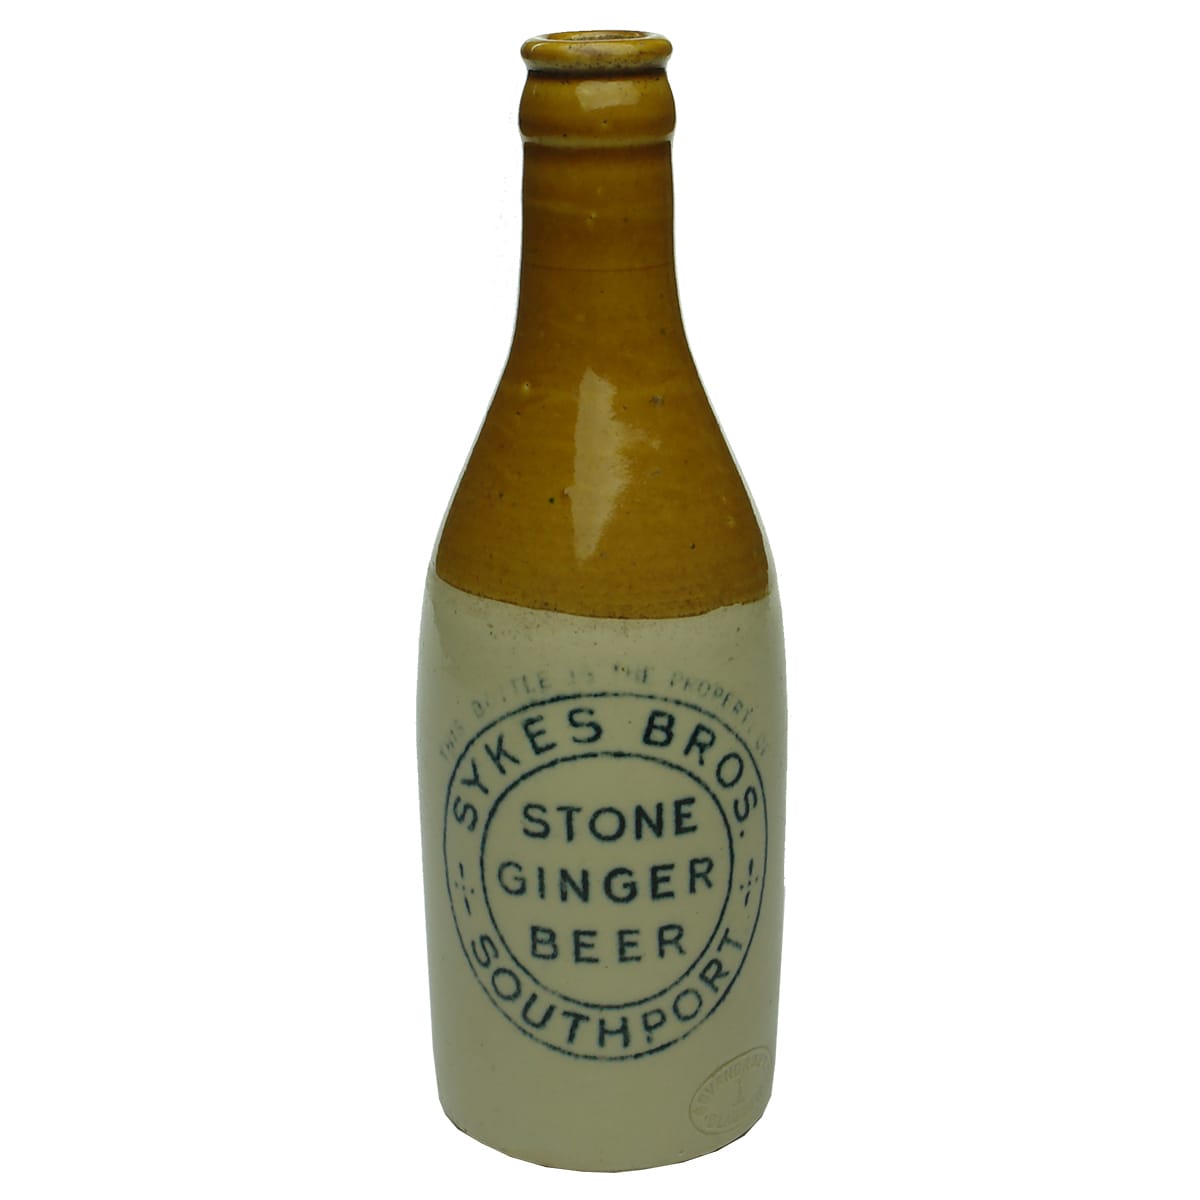 Ginger Beer. Sykes Bros., Southport. Govancroft pottery. Crown Seal. Tan top. (Queensland)